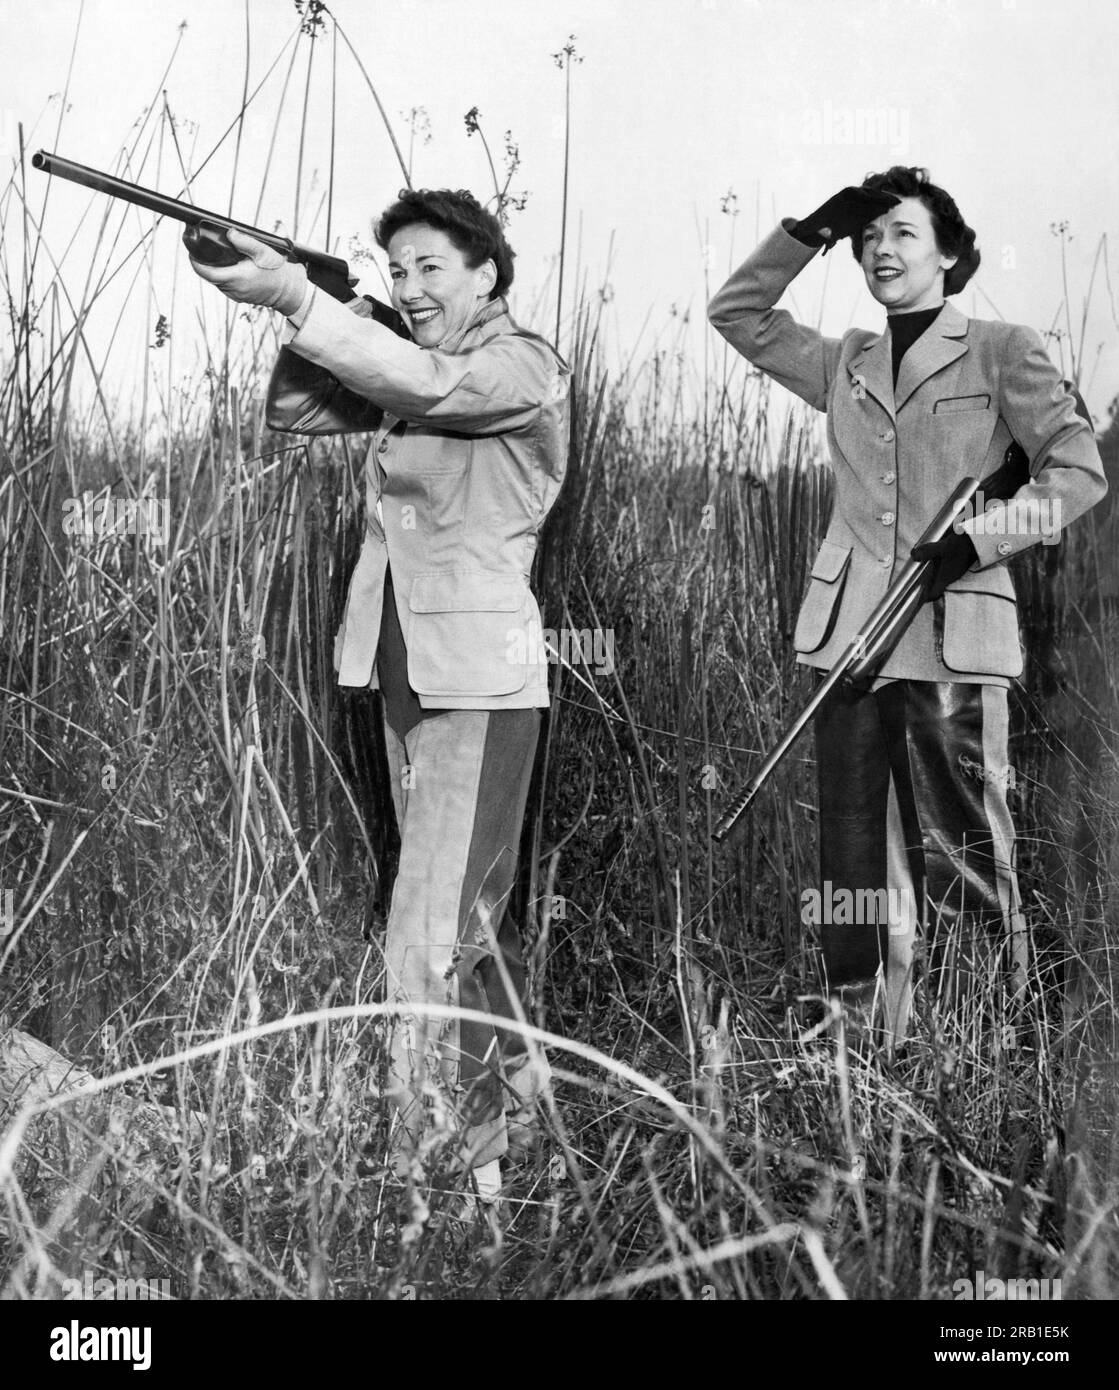 San Francisco, California:   1953 Two women out hunting in a field. One takes aim as the other watches. Stock Photo